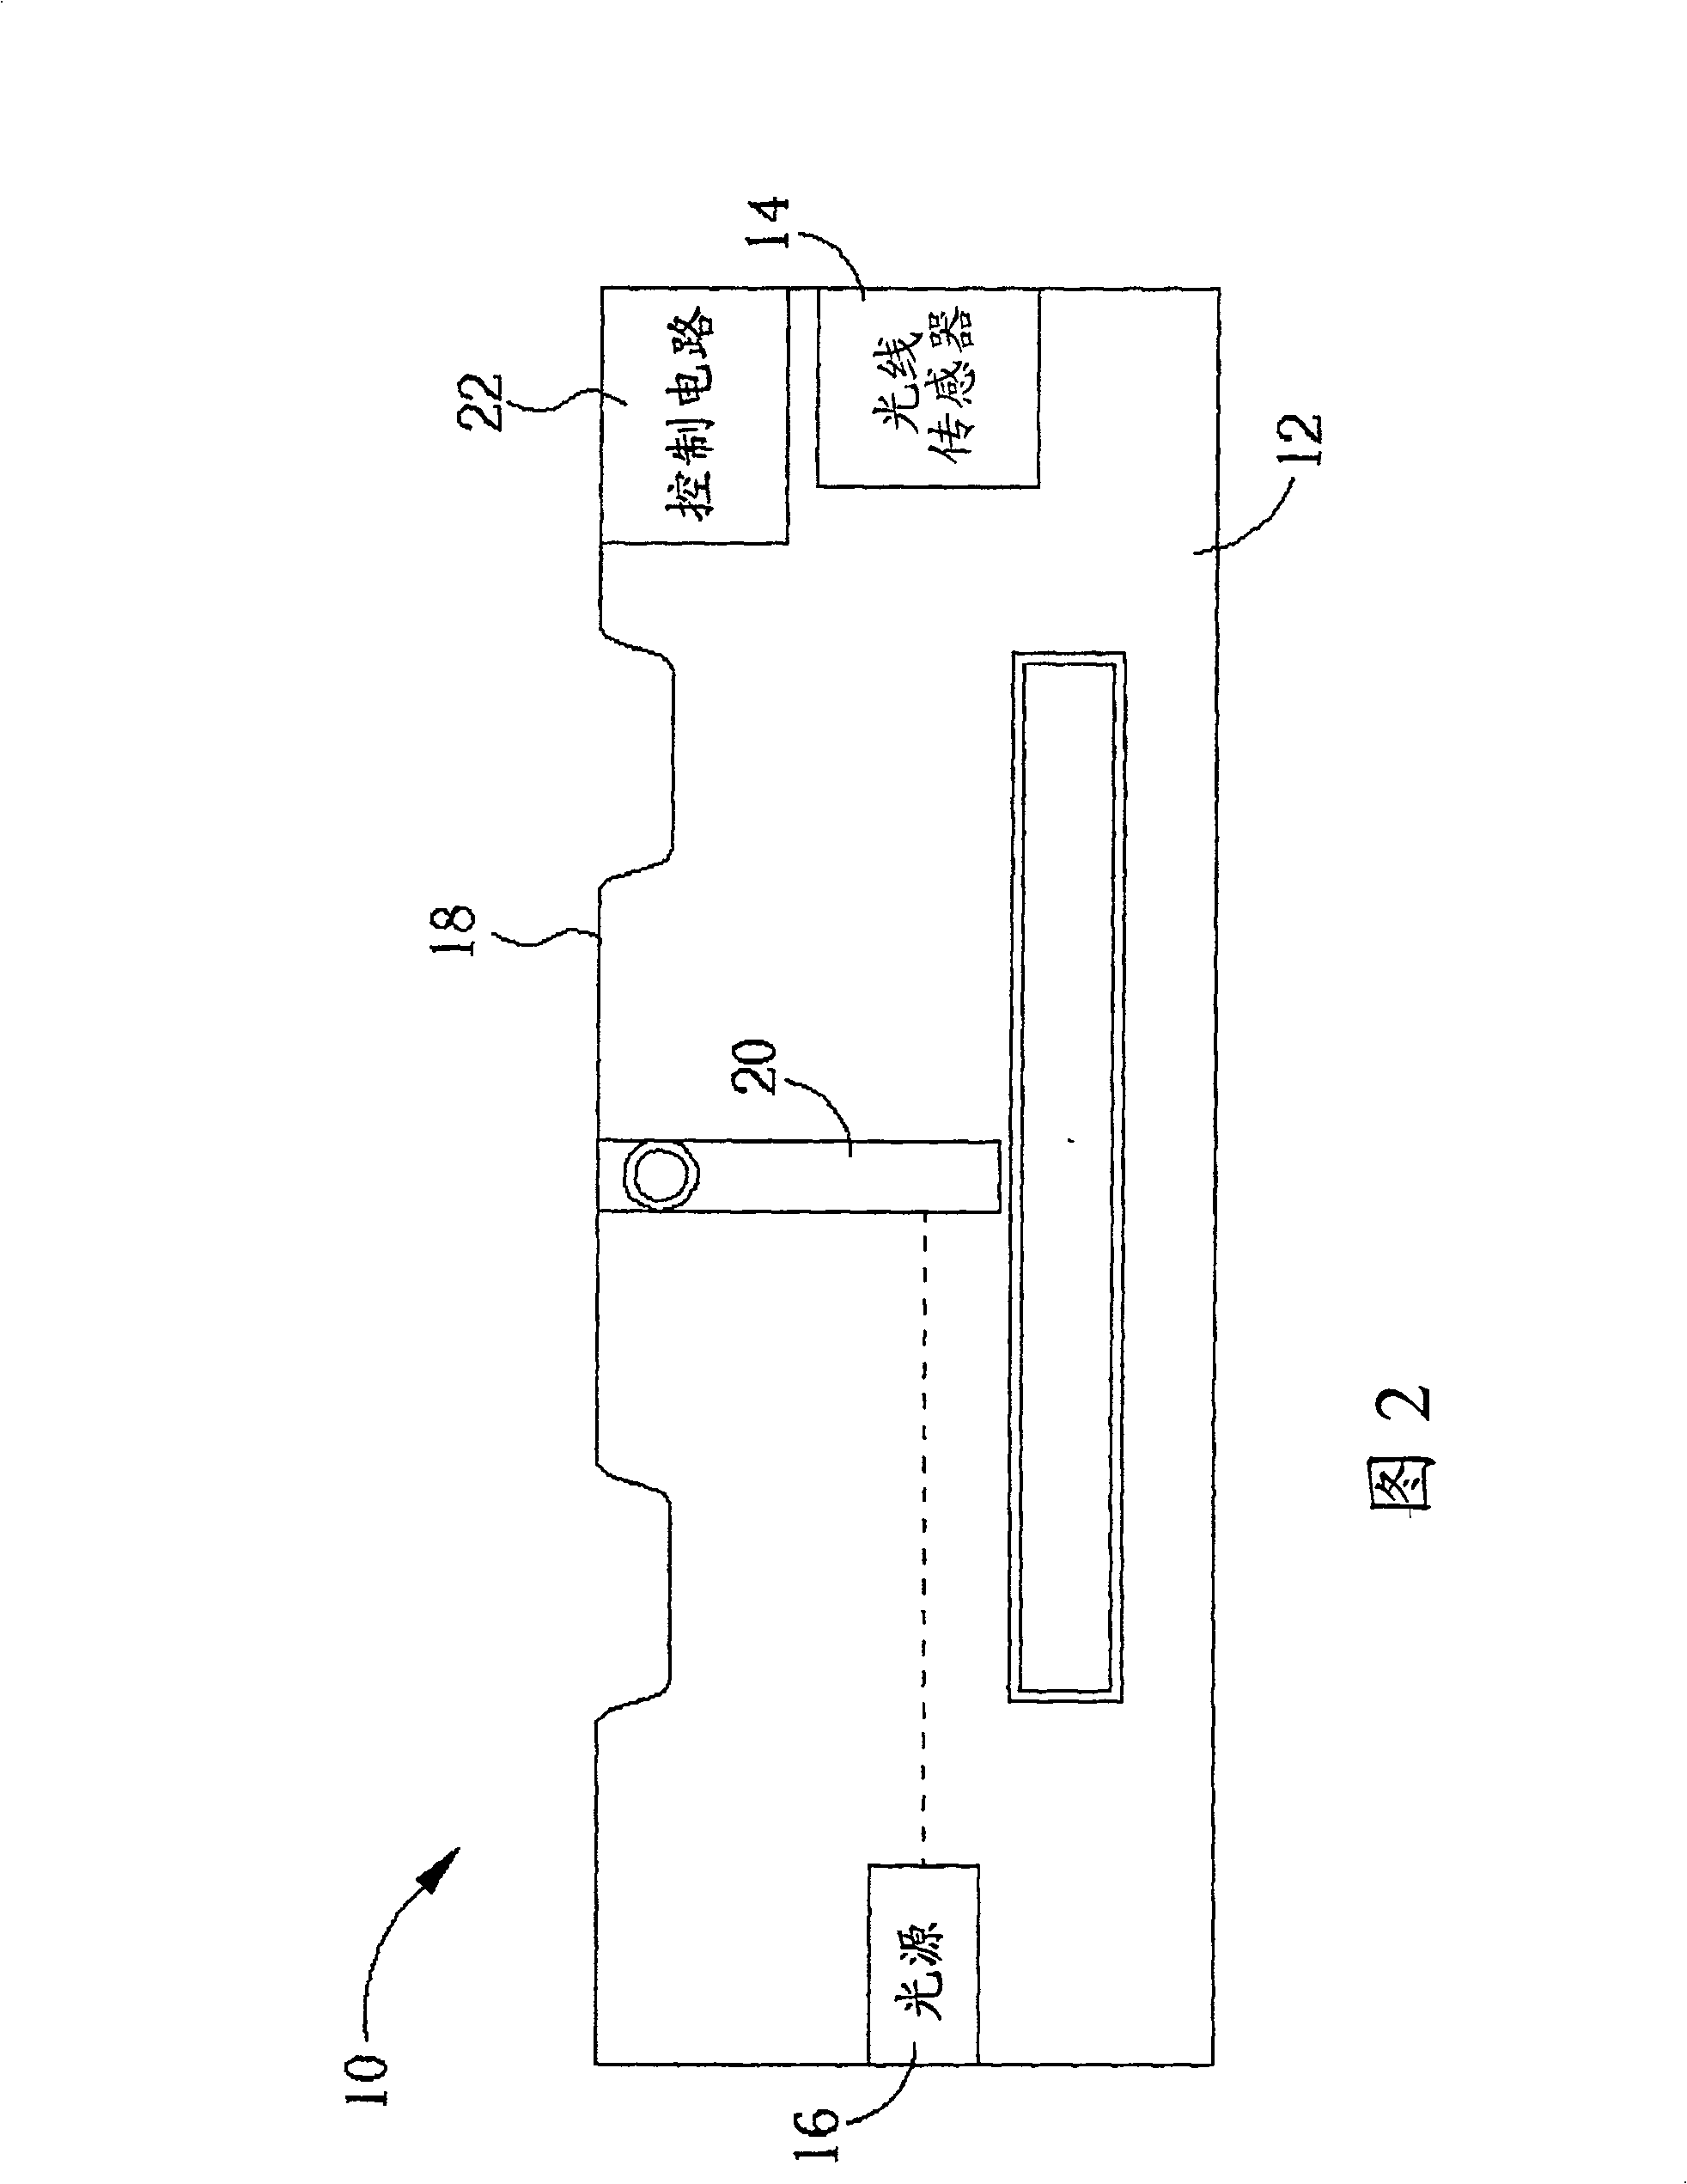 Electronic device with placing angle sensing function and method for selecting operation mode